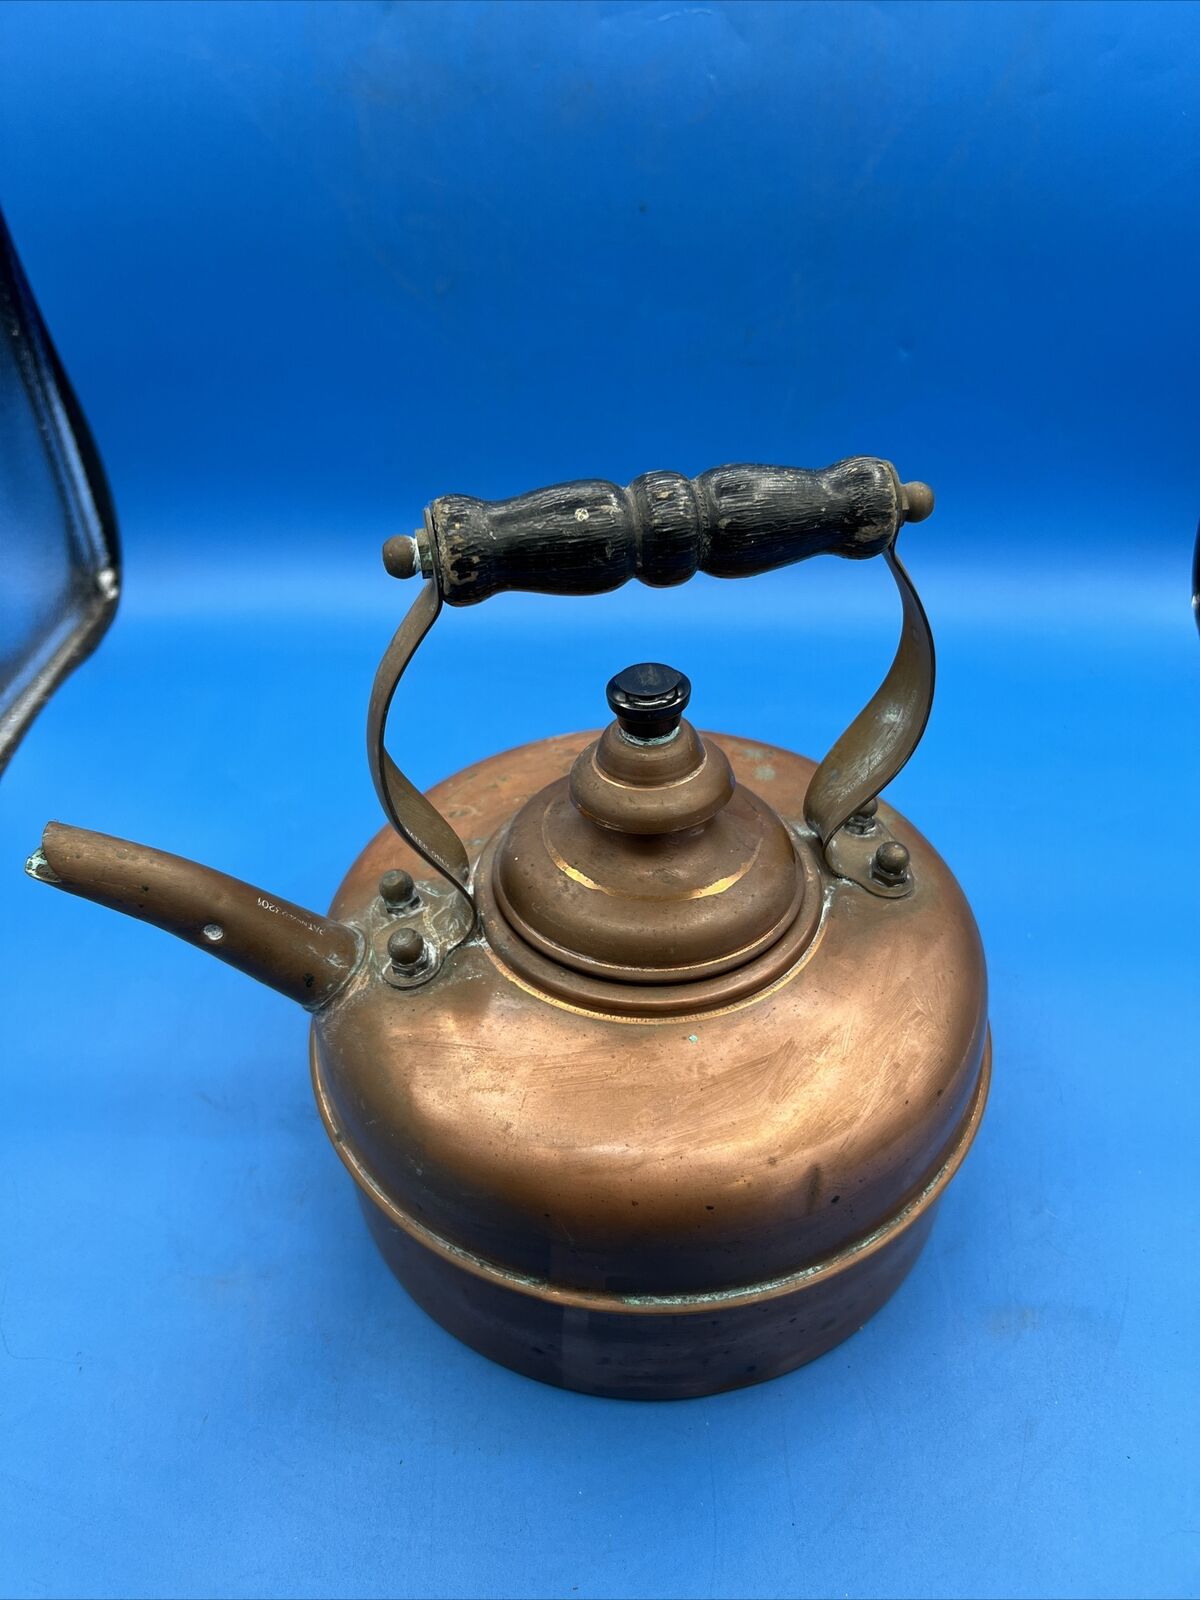 Vintage Simplex Solid Copper Whistling Tea Kettle Patent 423201 made in England